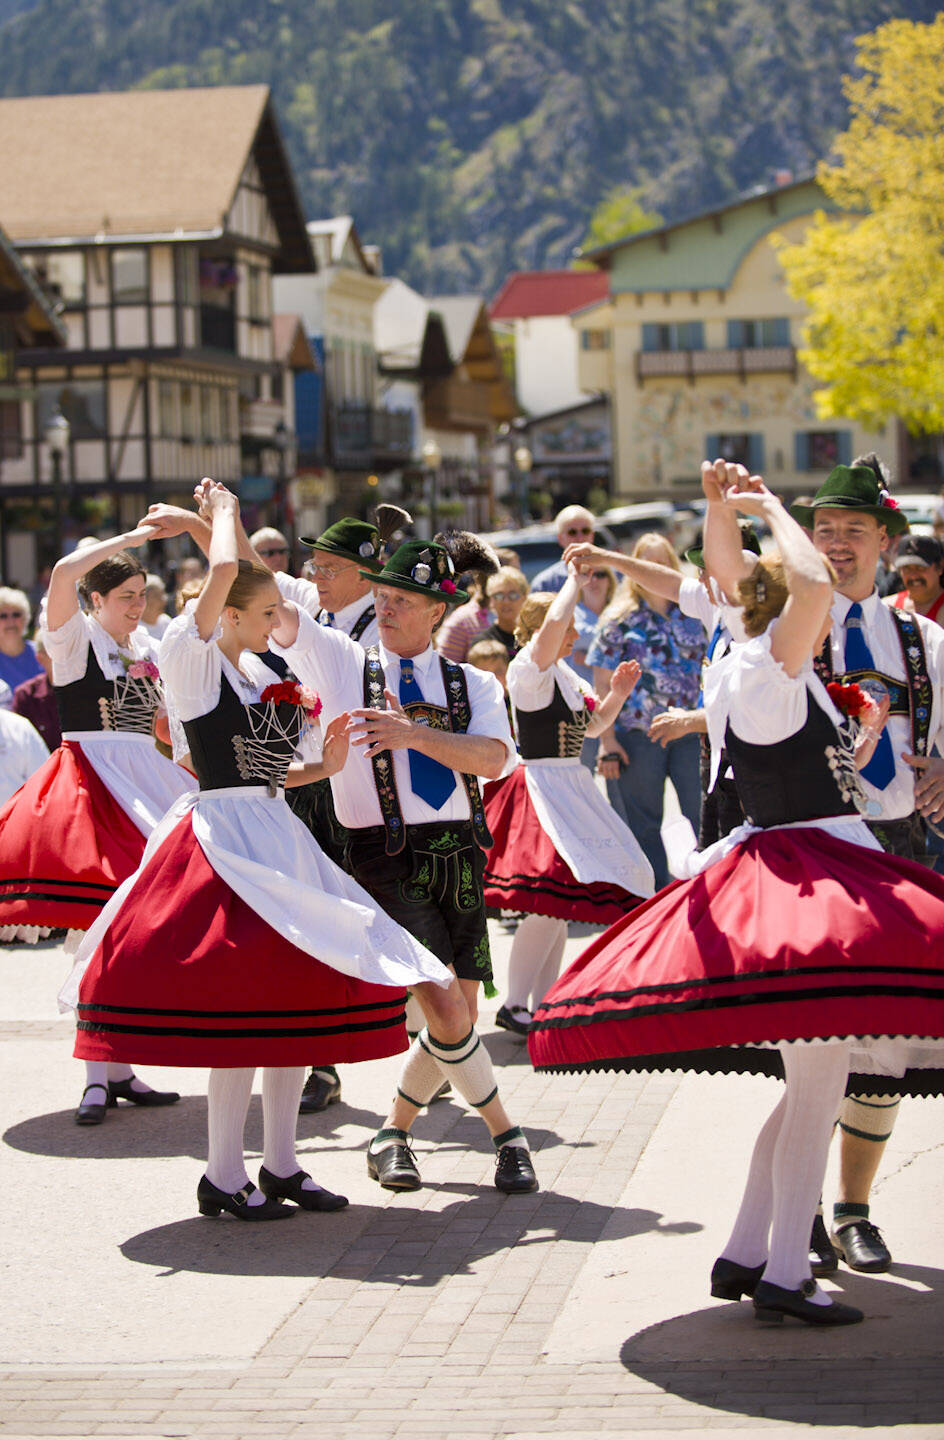 Leavenworth’s Maifest celebrations include an array of music, dancing and other cultural celebrations.